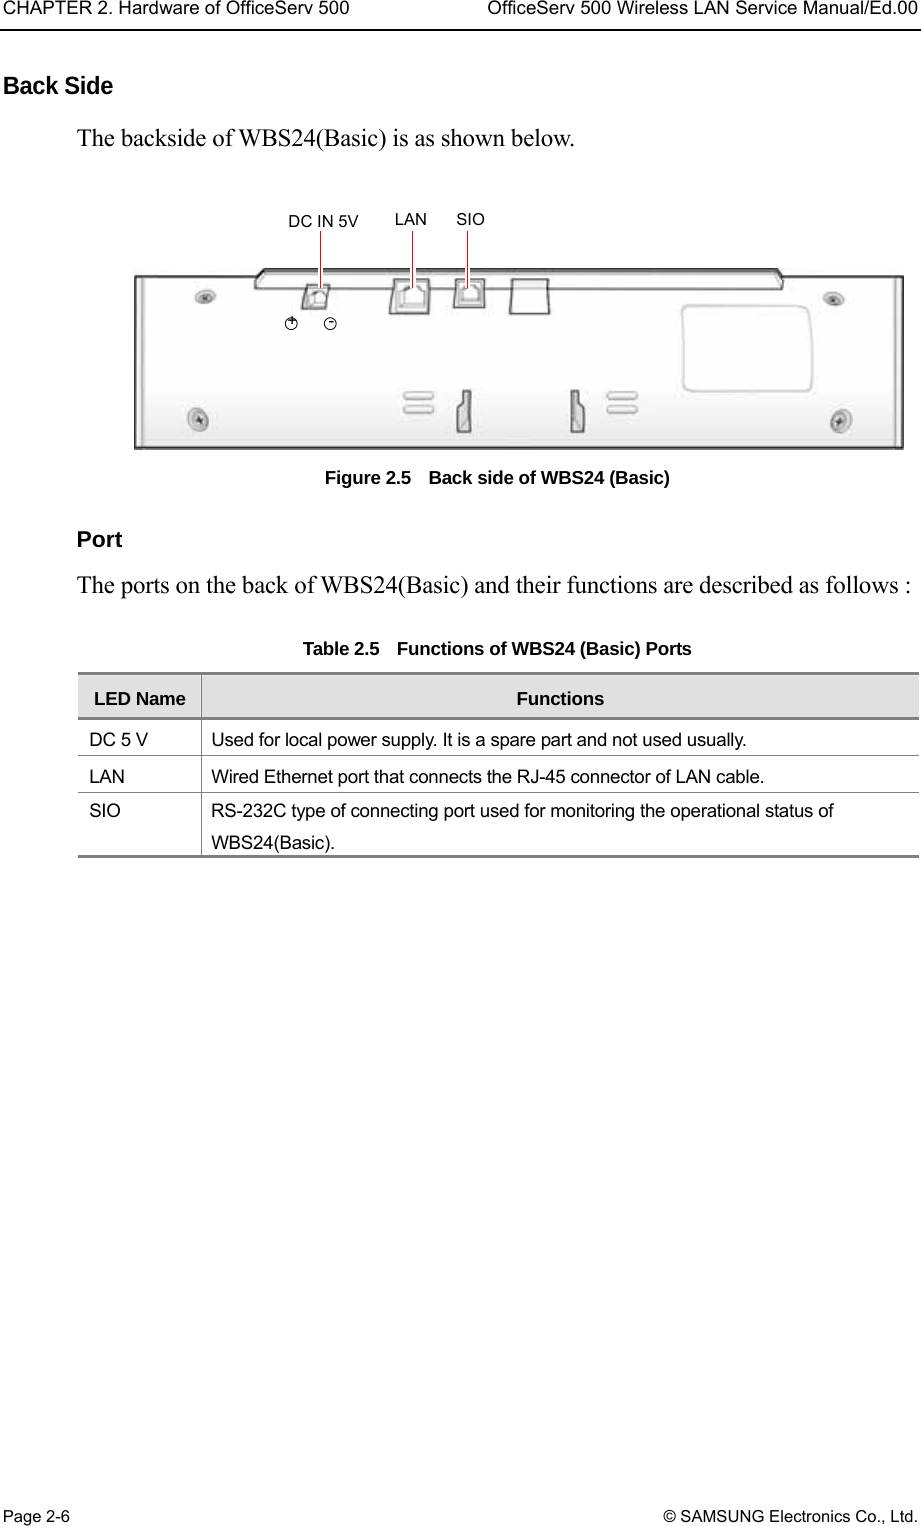 CHAPTER 2. Hardware of OfficeServ 500  OfficeServ 500 Wireless LAN Service Manual/Ed.00 Page 2-6 © SAMSUNG Electronics Co., Ltd. Back Side   The backside of WBS24(Basic) is as shown below.   Figure 2.5    Back side of WBS24 (Basic)    Port The ports on the back of WBS24(Basic) and their functions are described as follows :    Table 2.5    Functions of WBS24 (Basic) Ports LED Name  Functions DC 5 V    Used for local power supply. It is a spare part and not used usually.   LAN  Wired Ethernet port that connects the RJ-45 connector of LAN cable.   SIO  RS-232C type of connecting port used for monitoring the operational status of WBS24(Basic).    DC IN 5V  LAN SIO○+ ○- 